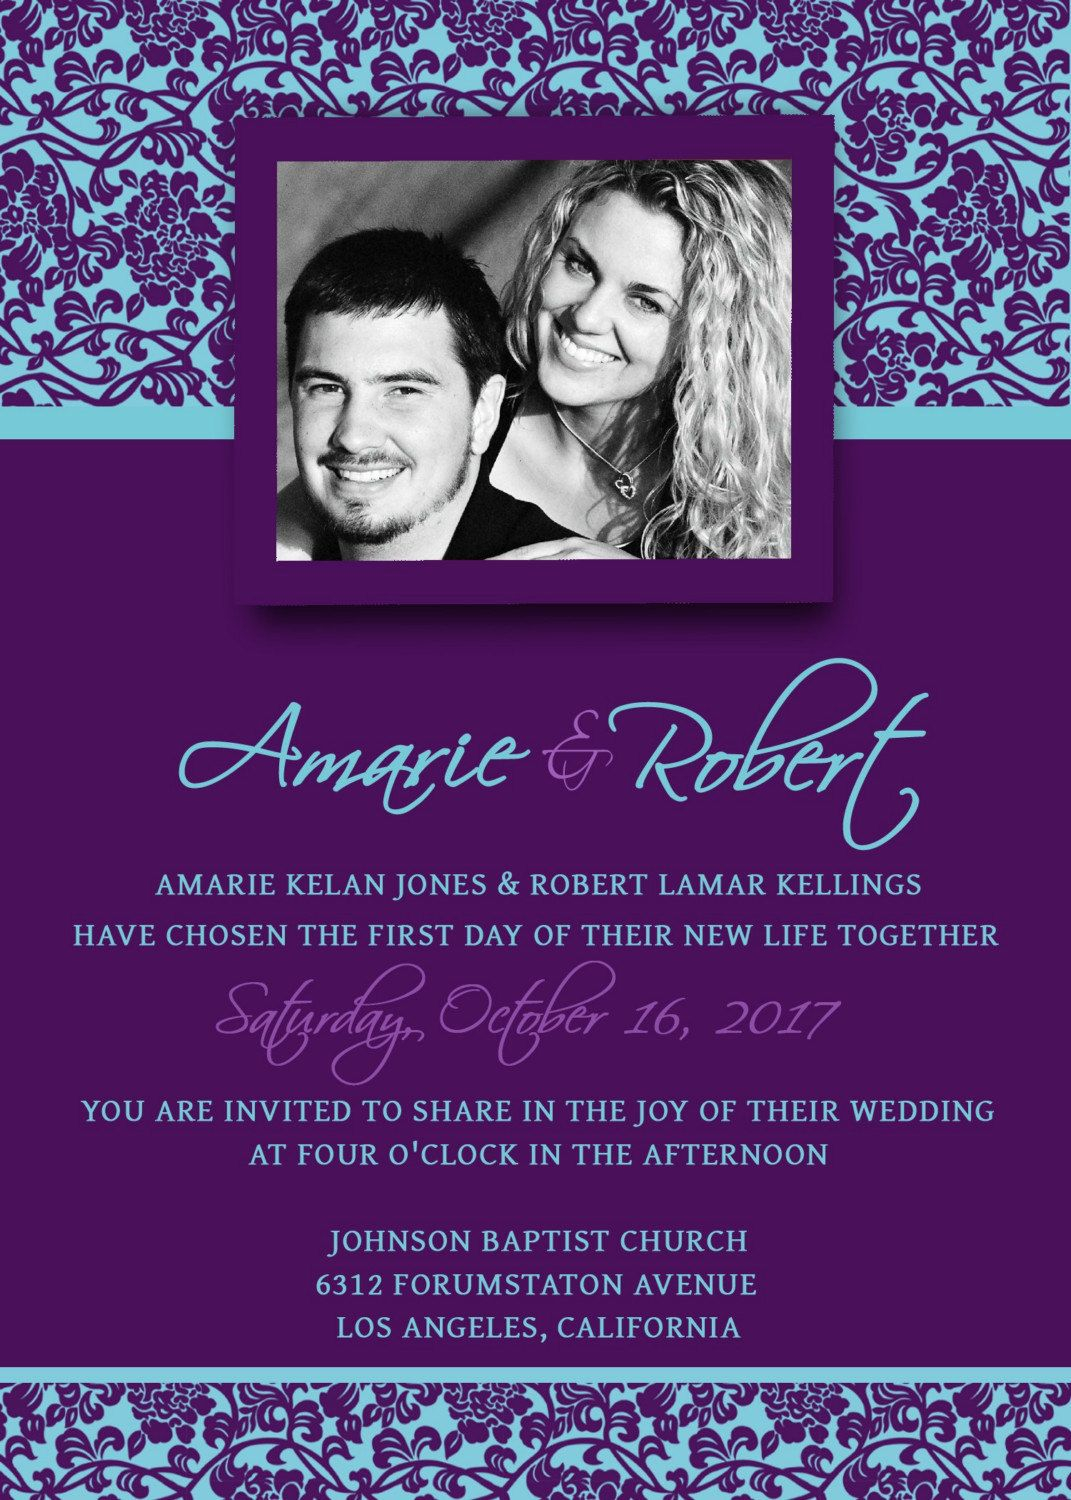 Printable Wedding Invitation Template Set Psd Photoshop Violet within proportions 1071 X 1500